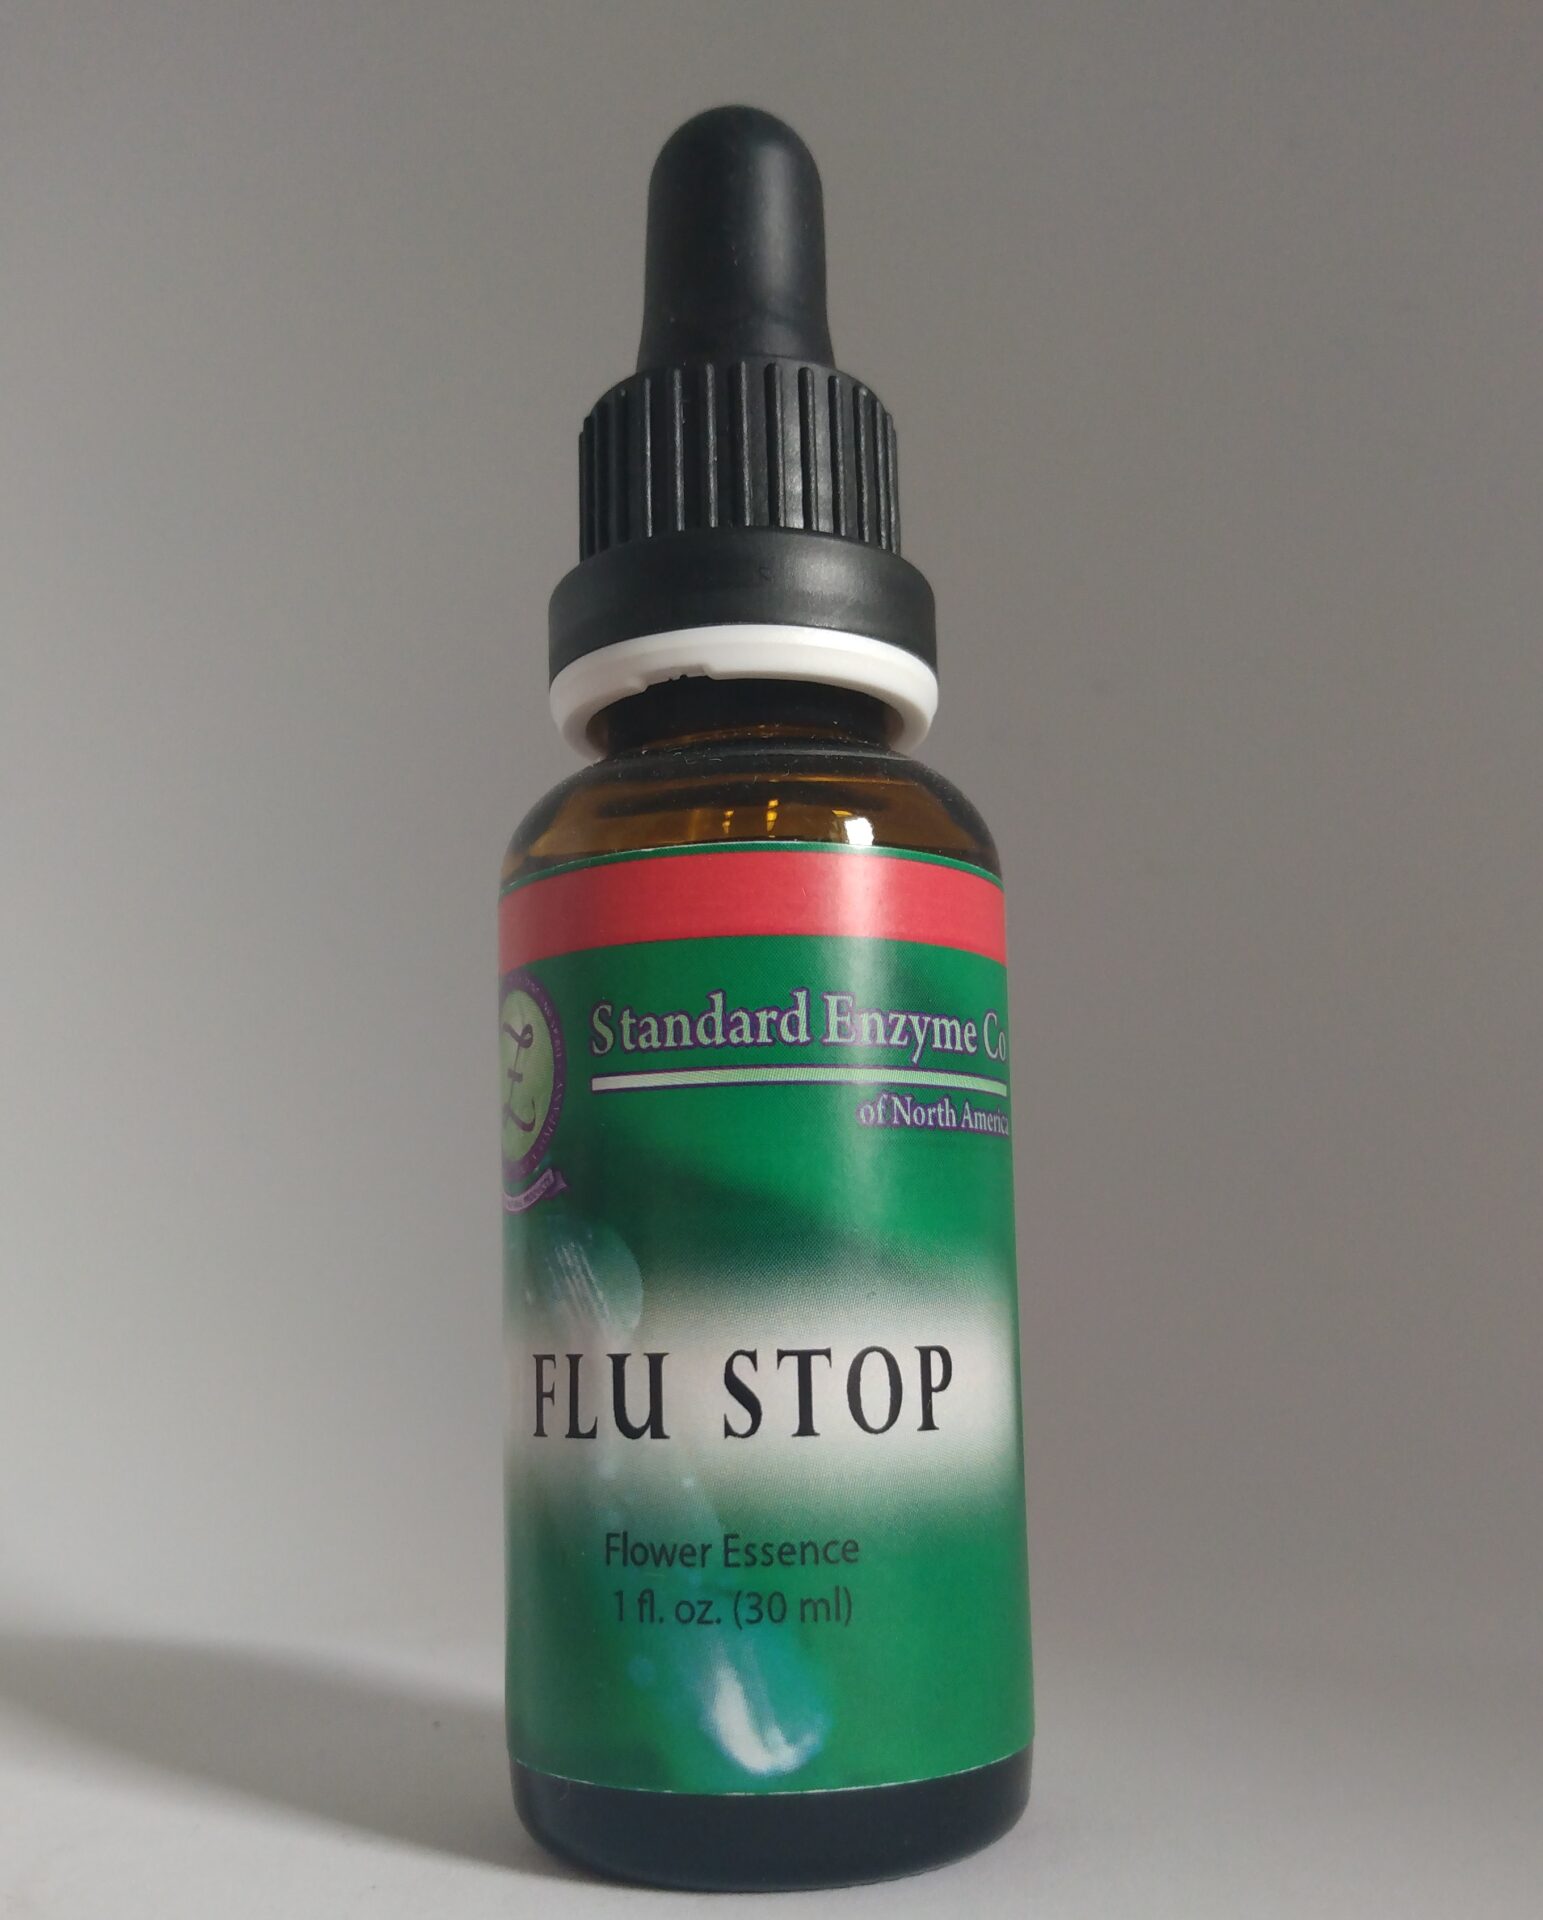 An image of our product - Flu Stop.